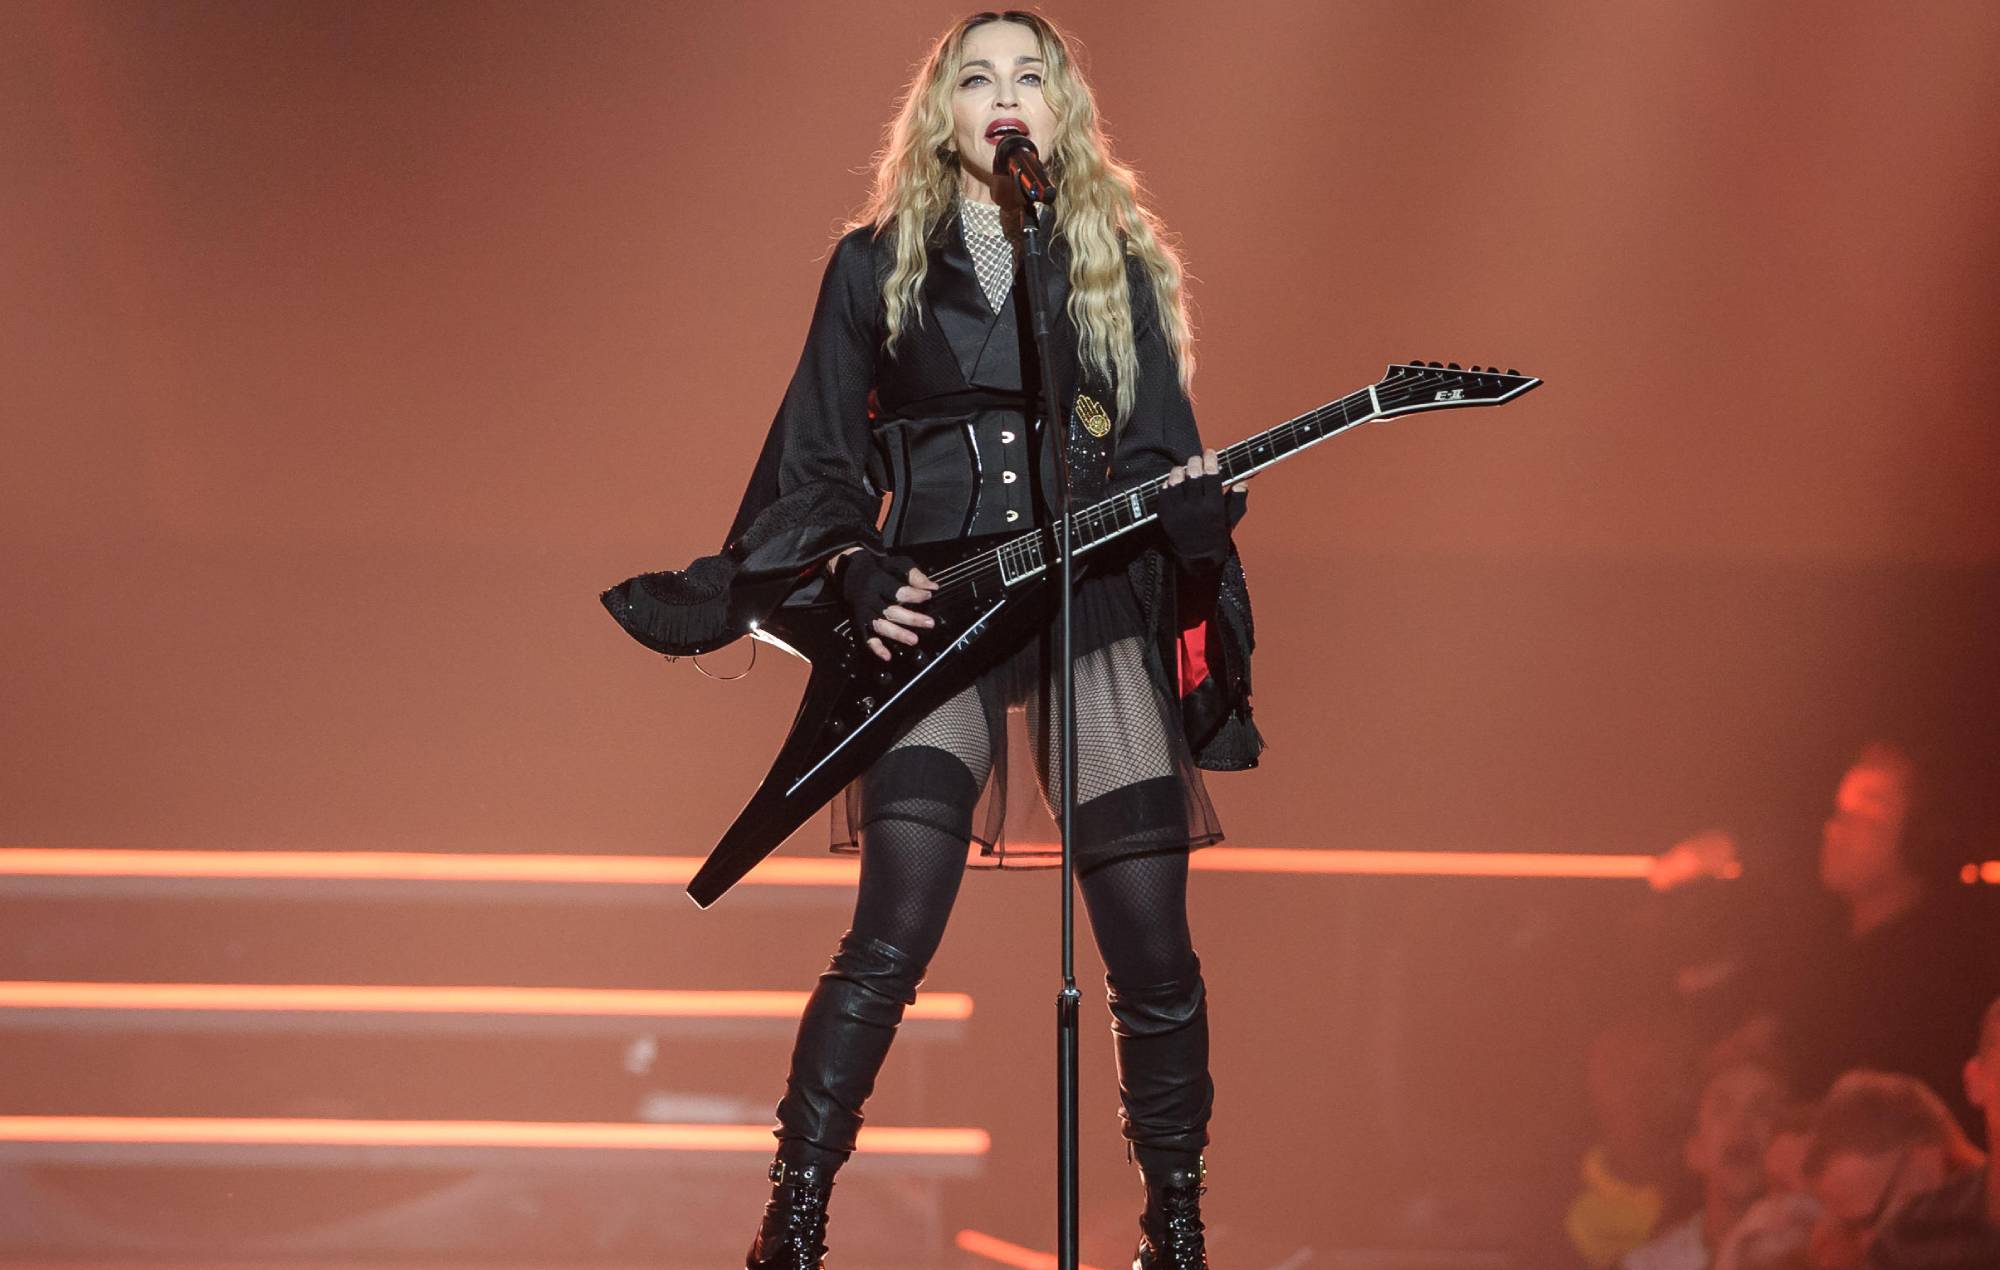 Here's our dream setlist for Madonna's greatest hits tour